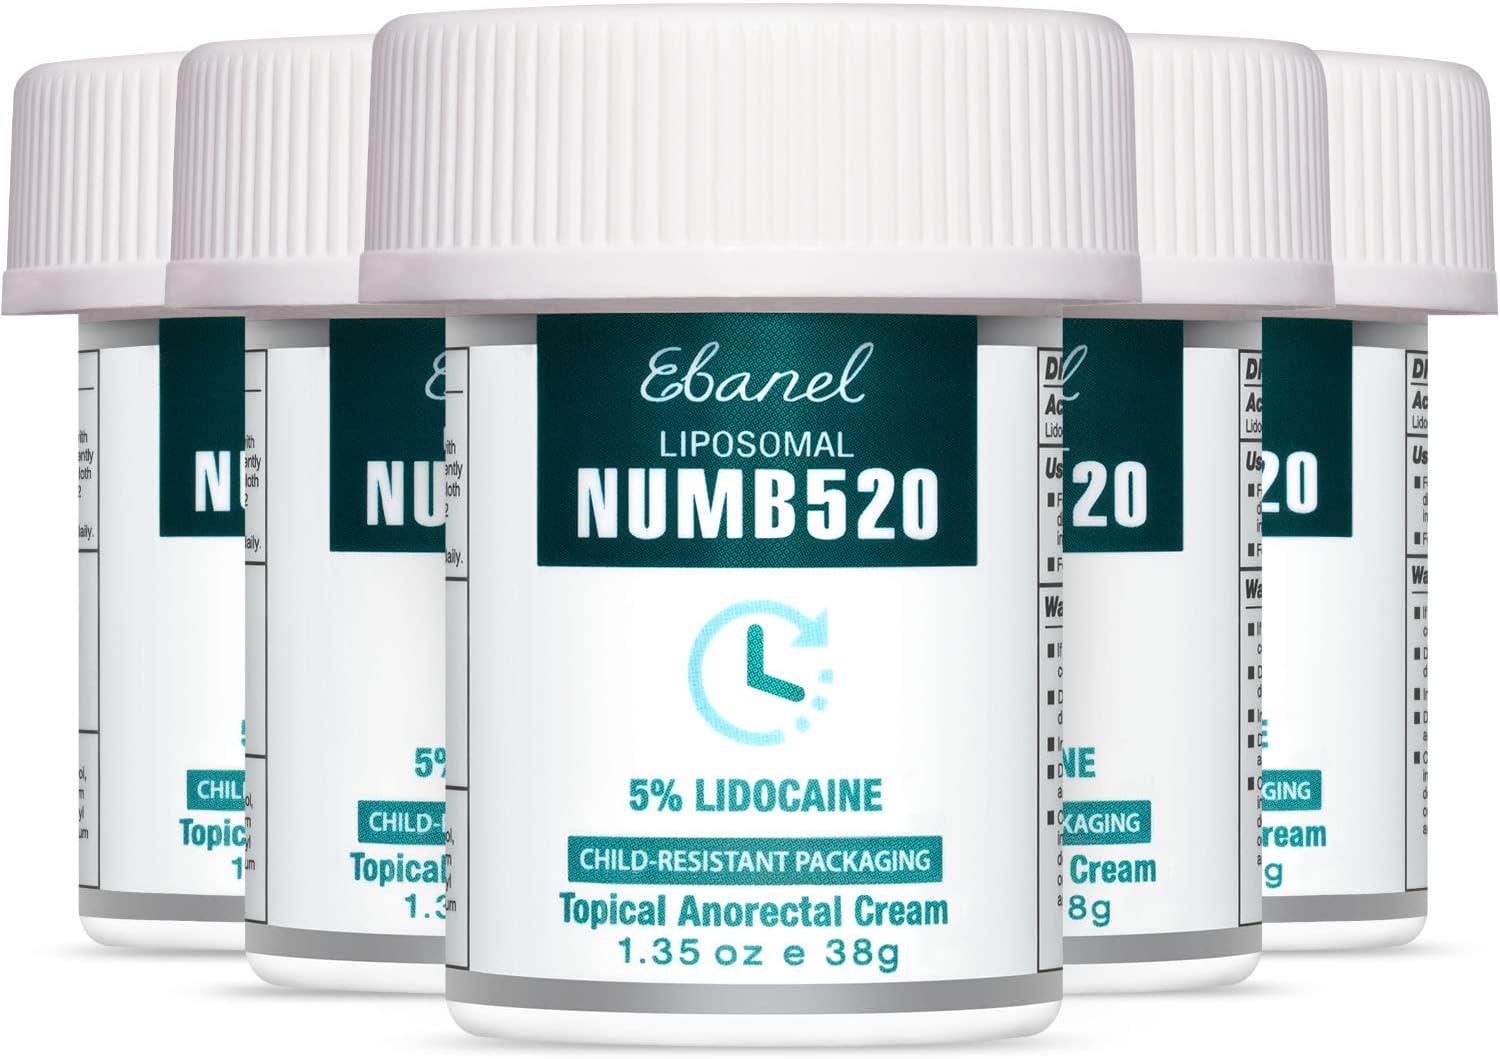 Ebanel 5% Lidocaine Numbing Cream, Pain Relief Cream Burn Itch Cream, 5-Pack Topical Anesthetic Lidocaine Cream Maximum Strength with Vitamin E for Local and Anorectal Uses, Hemorrhoid Treatment